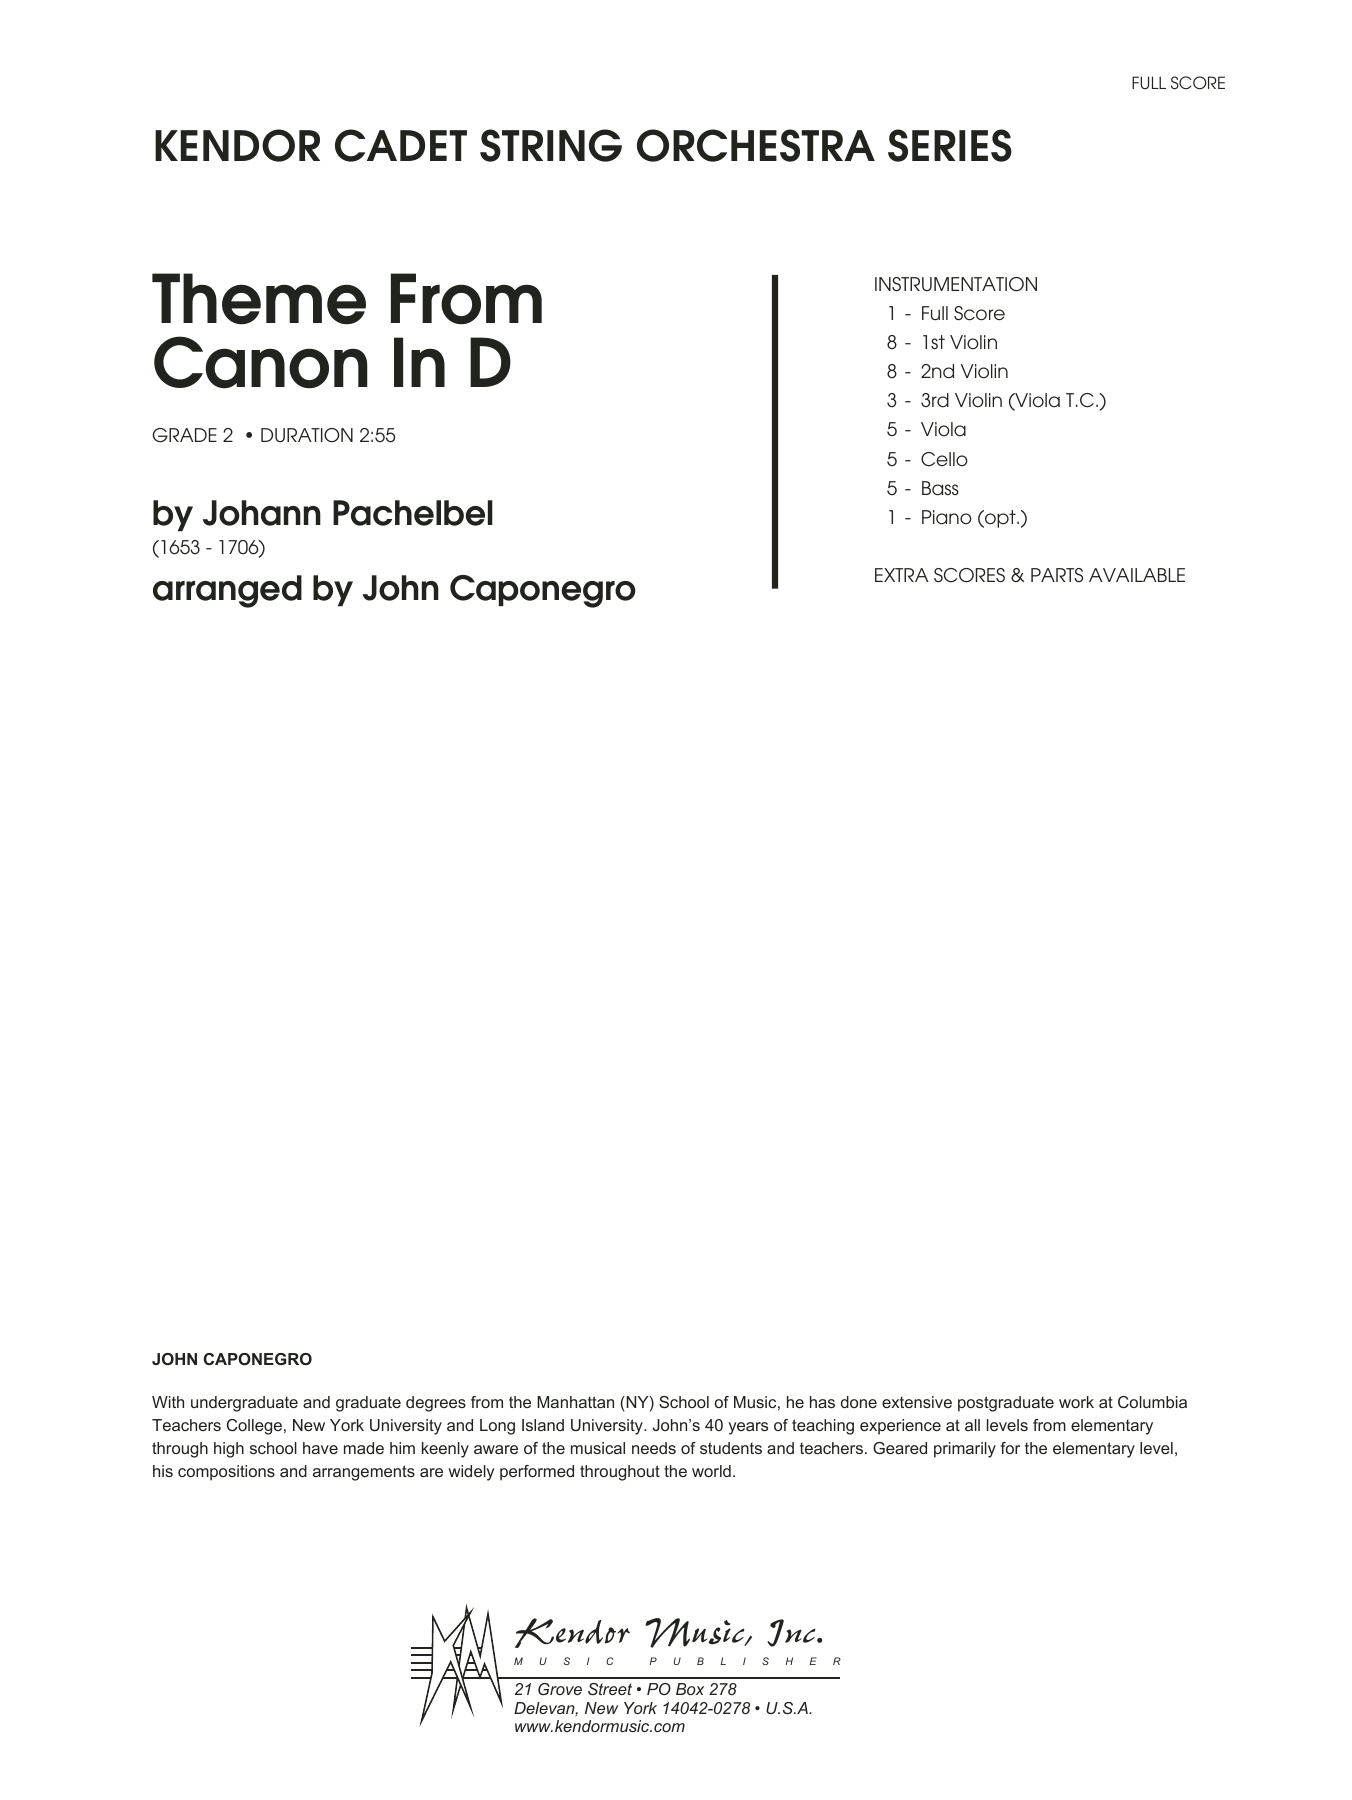 Download John Caponegro Theme From Canon In D - Full Score Sheet Music